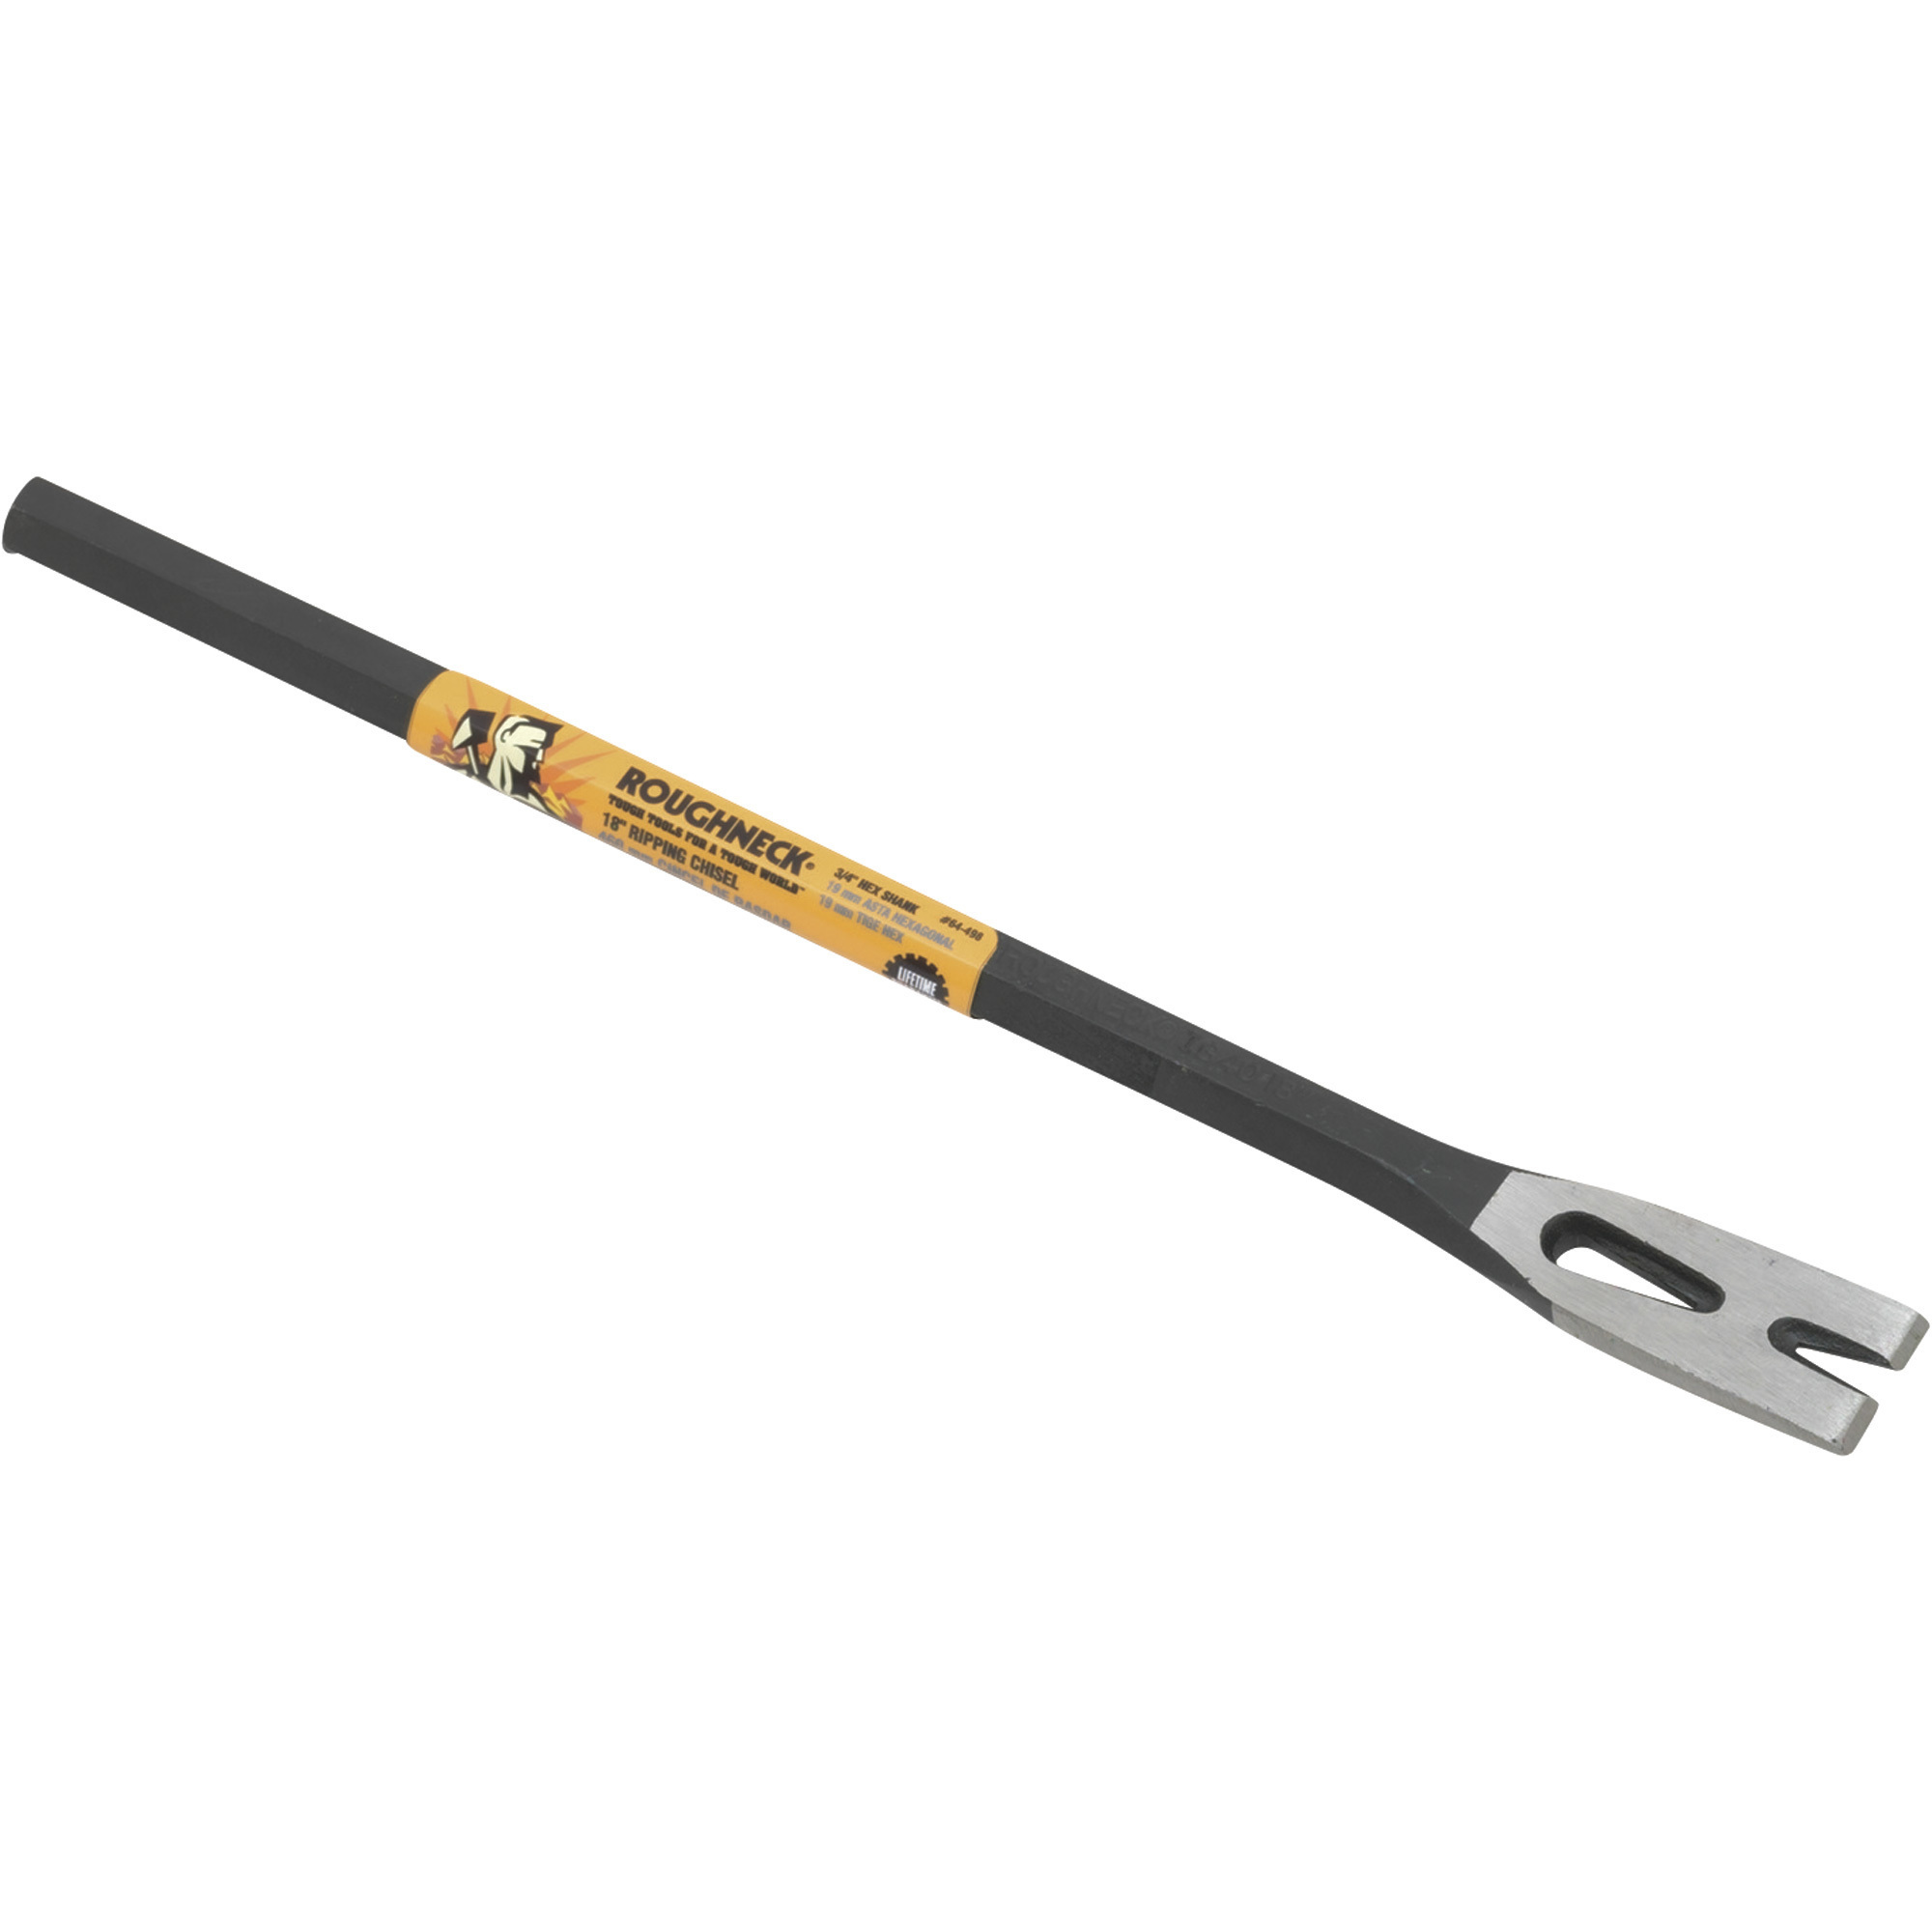 Roughneck 18Inch Straight Ripping Chisel, Model 70-408